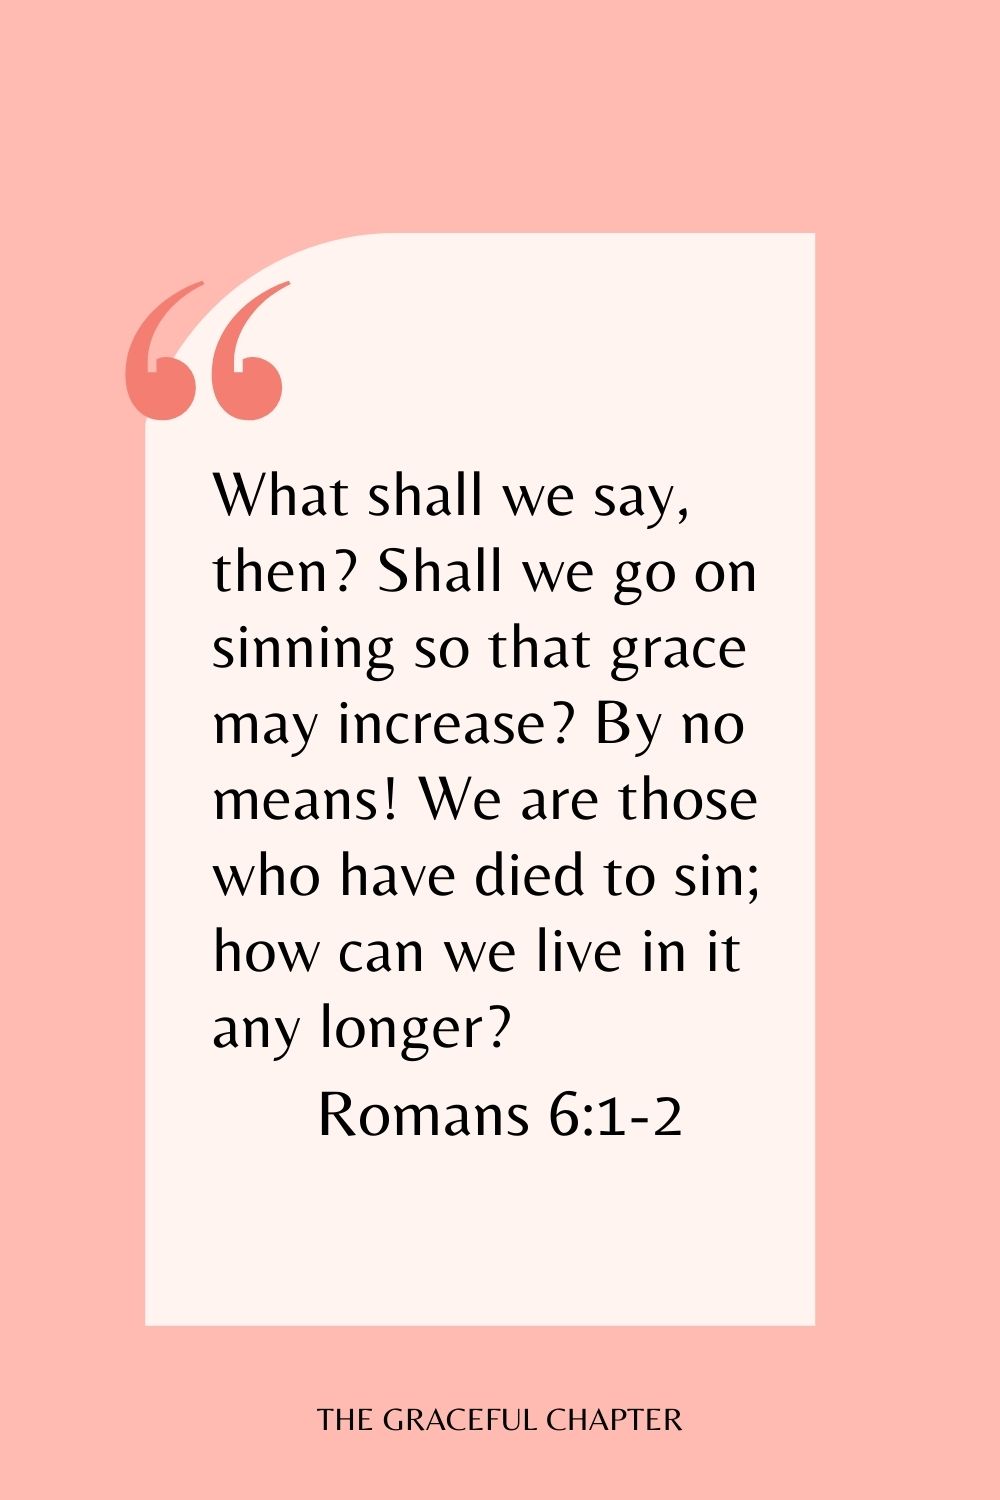 What shall we say, then? Shall we go on sinning so that grace may increase? By no means! We are those who have died to sin; how can we live in it any longer? Romans 6:1-2